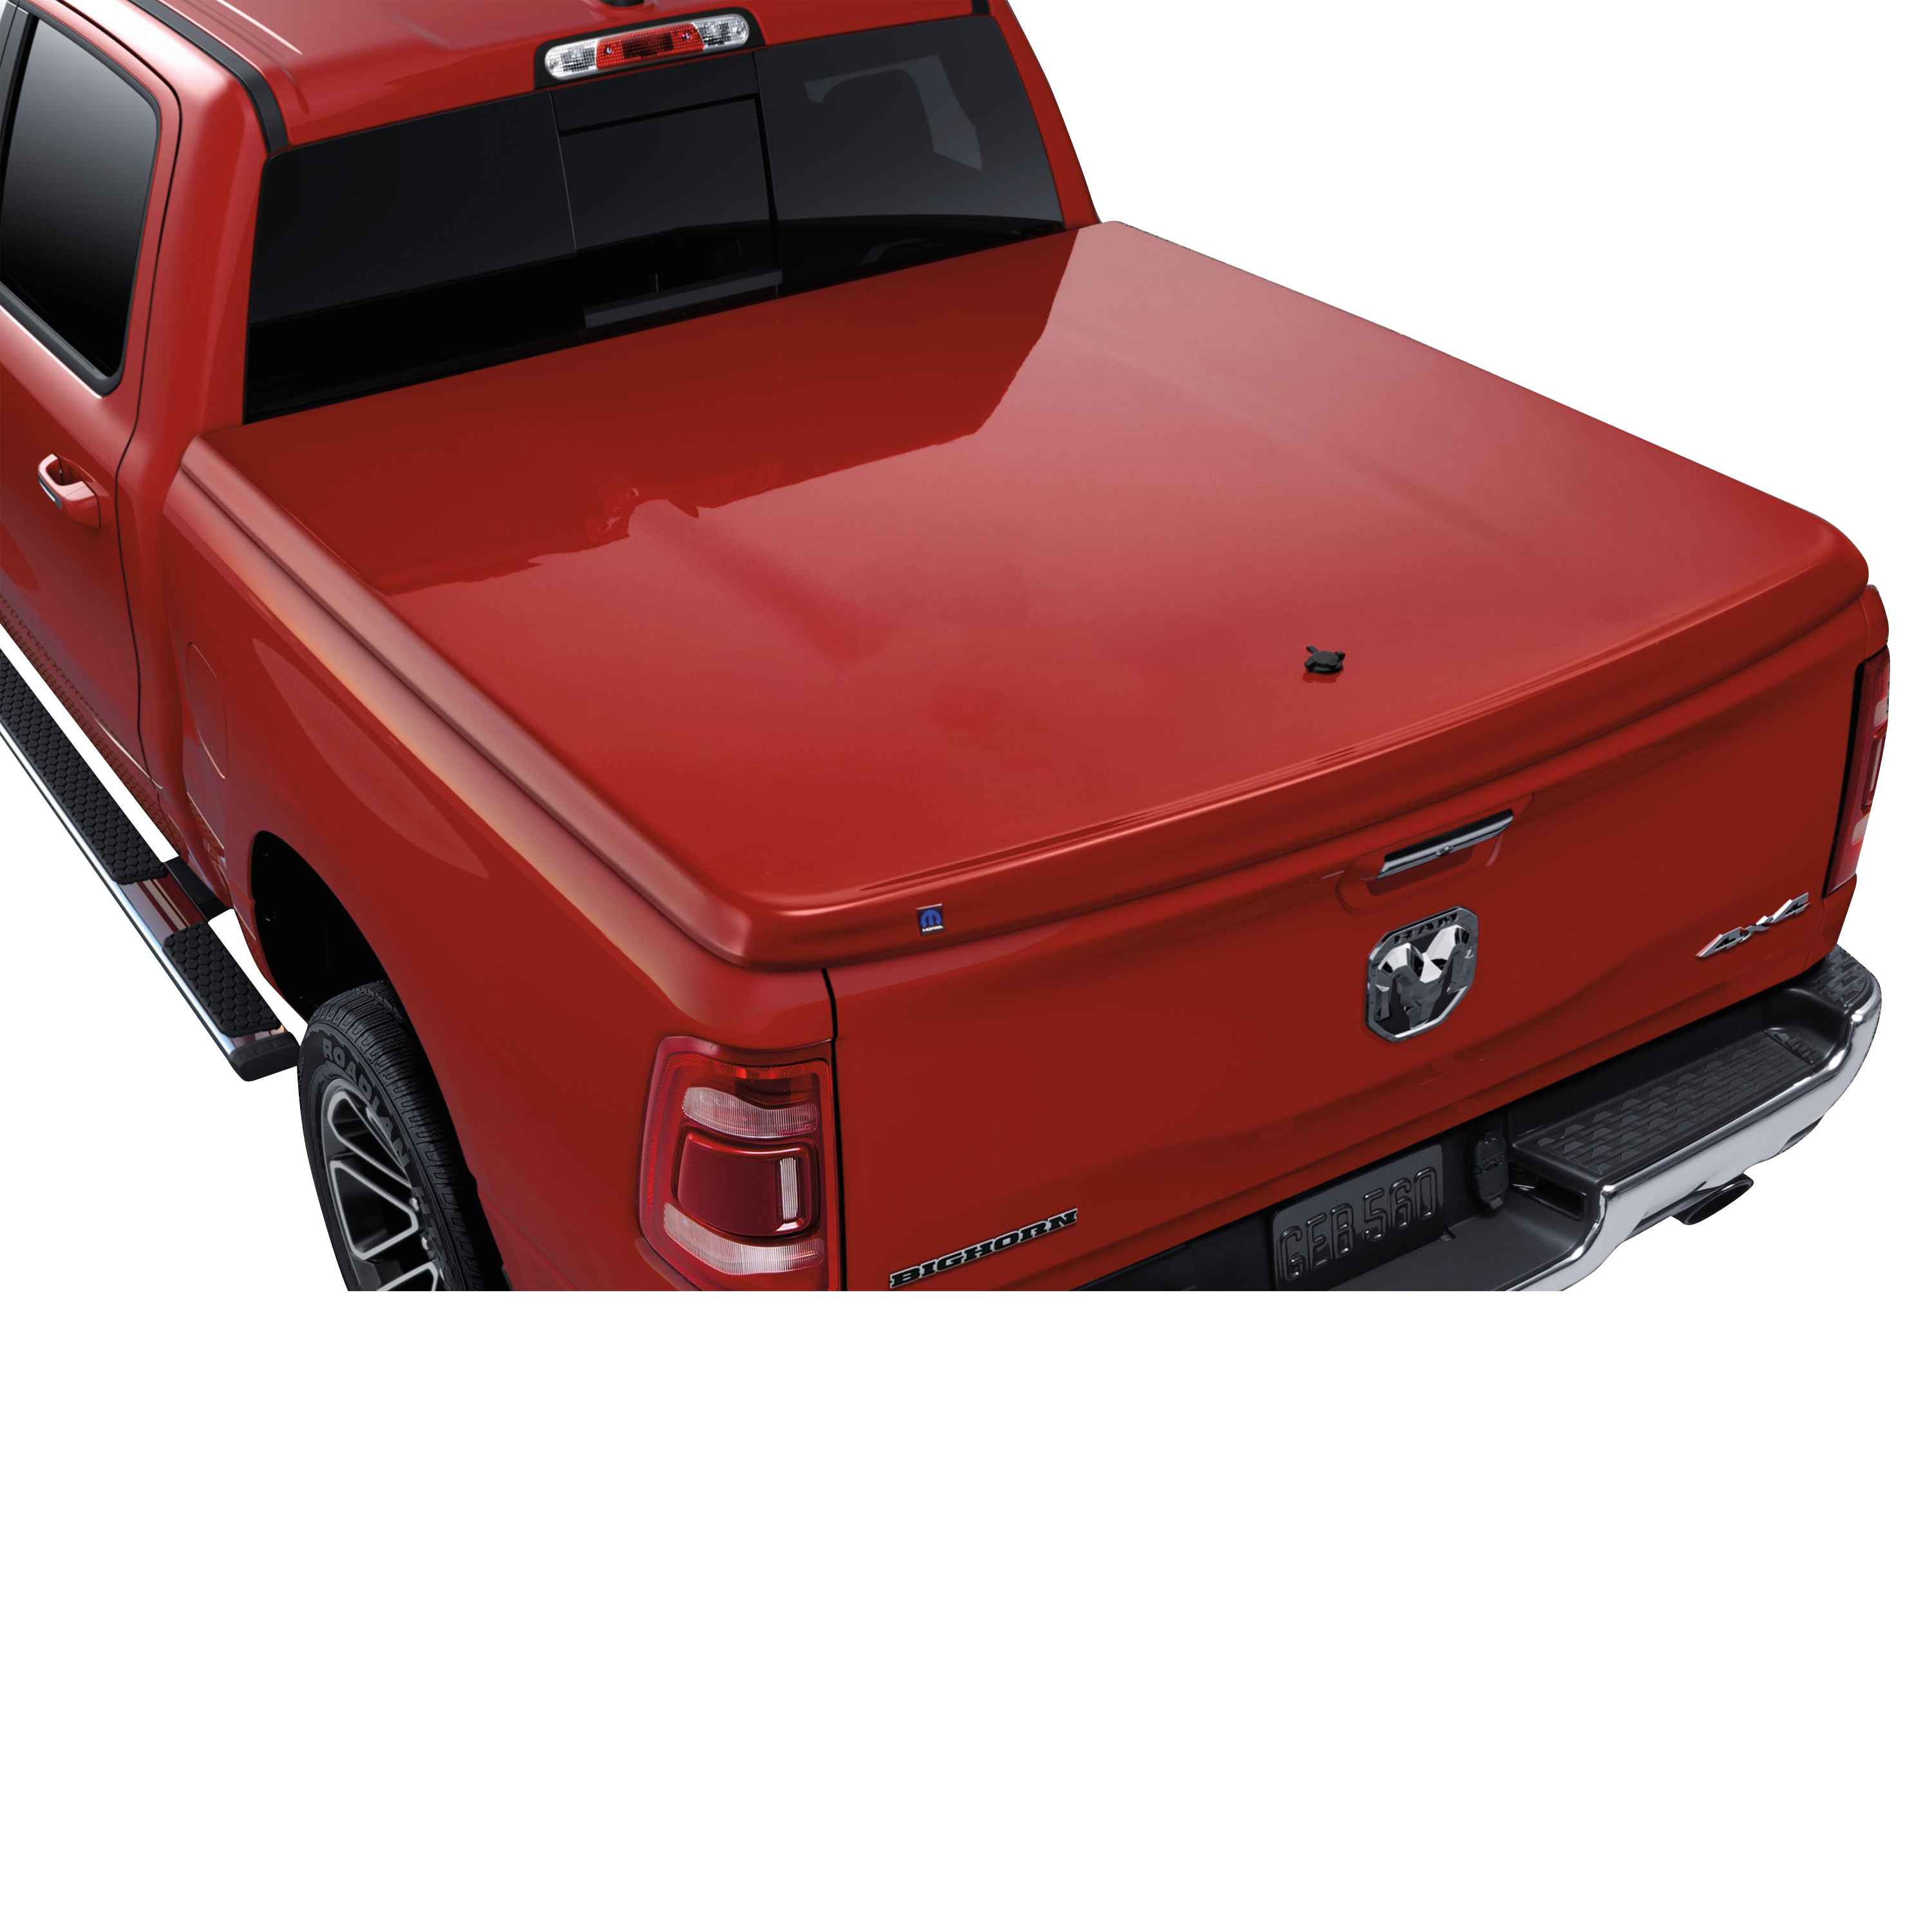 OEM 2021 Ram 1500 One-Piece Tonneau Cover in Body Color for 6 4 Conventional Bed - Delmonico Red (Part #82215241AB)